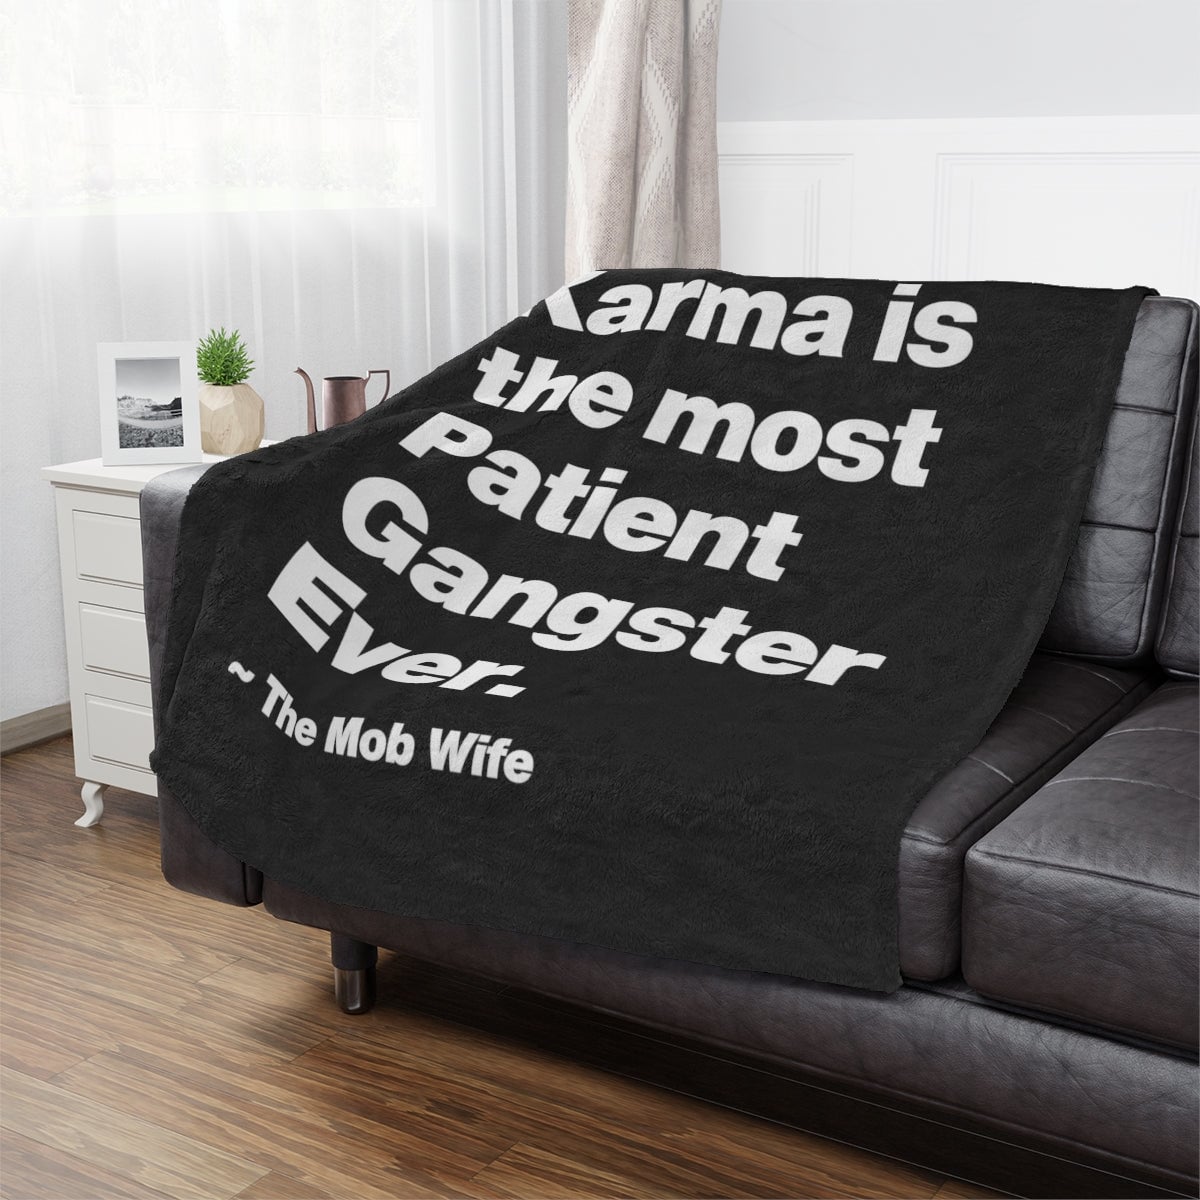 Unique Gangster Gift - Karma is The Most Patient Gangster Ever Minky Blanket